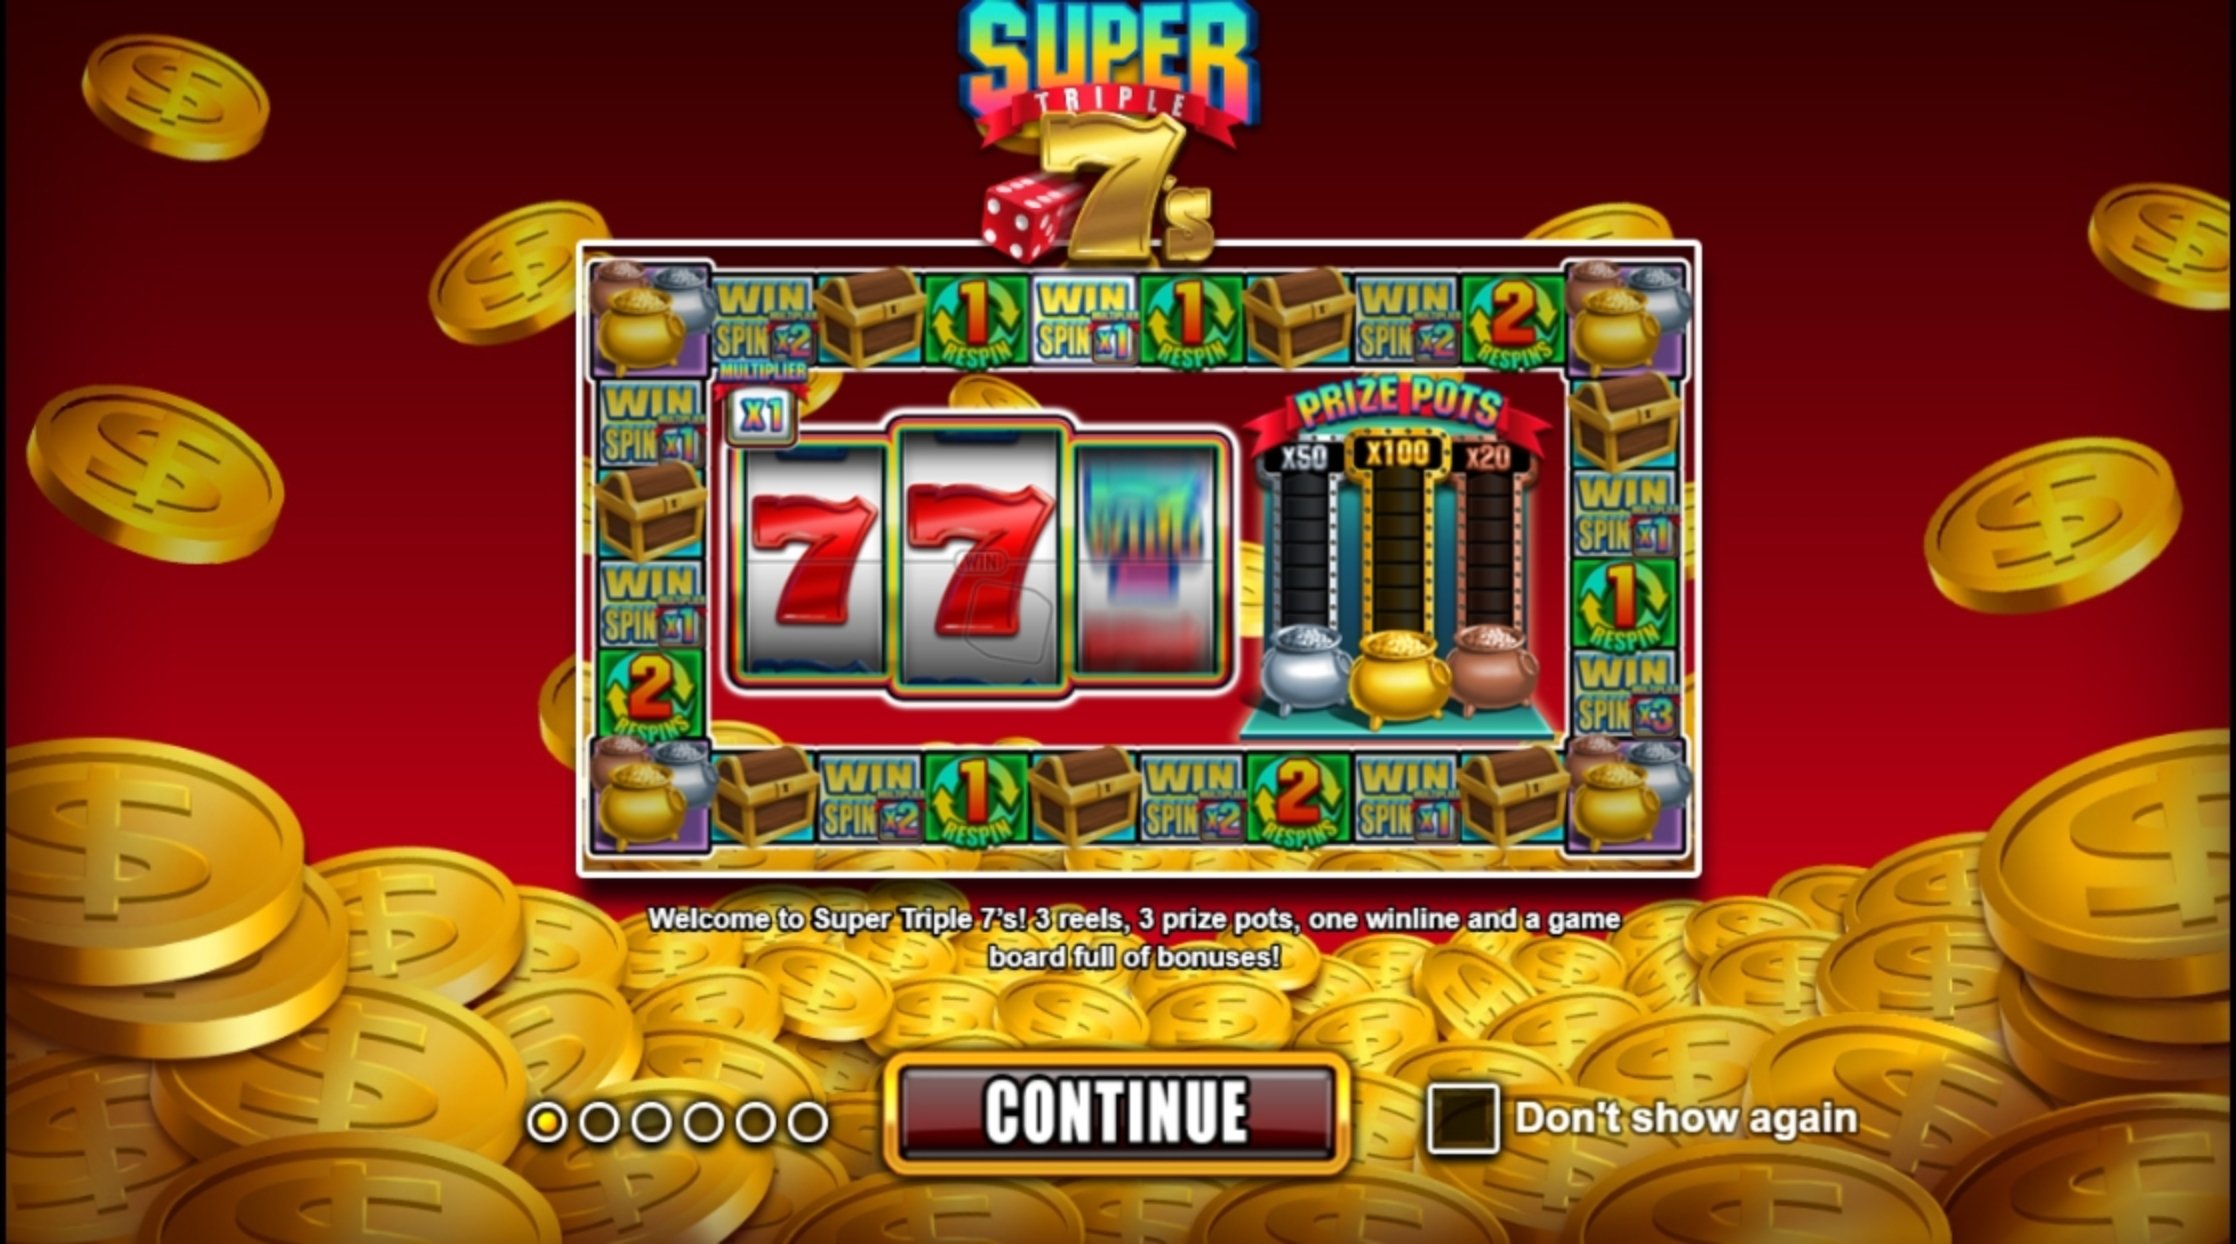 Play Super Triple 7's Free Casino Slot Game by Betsson Group